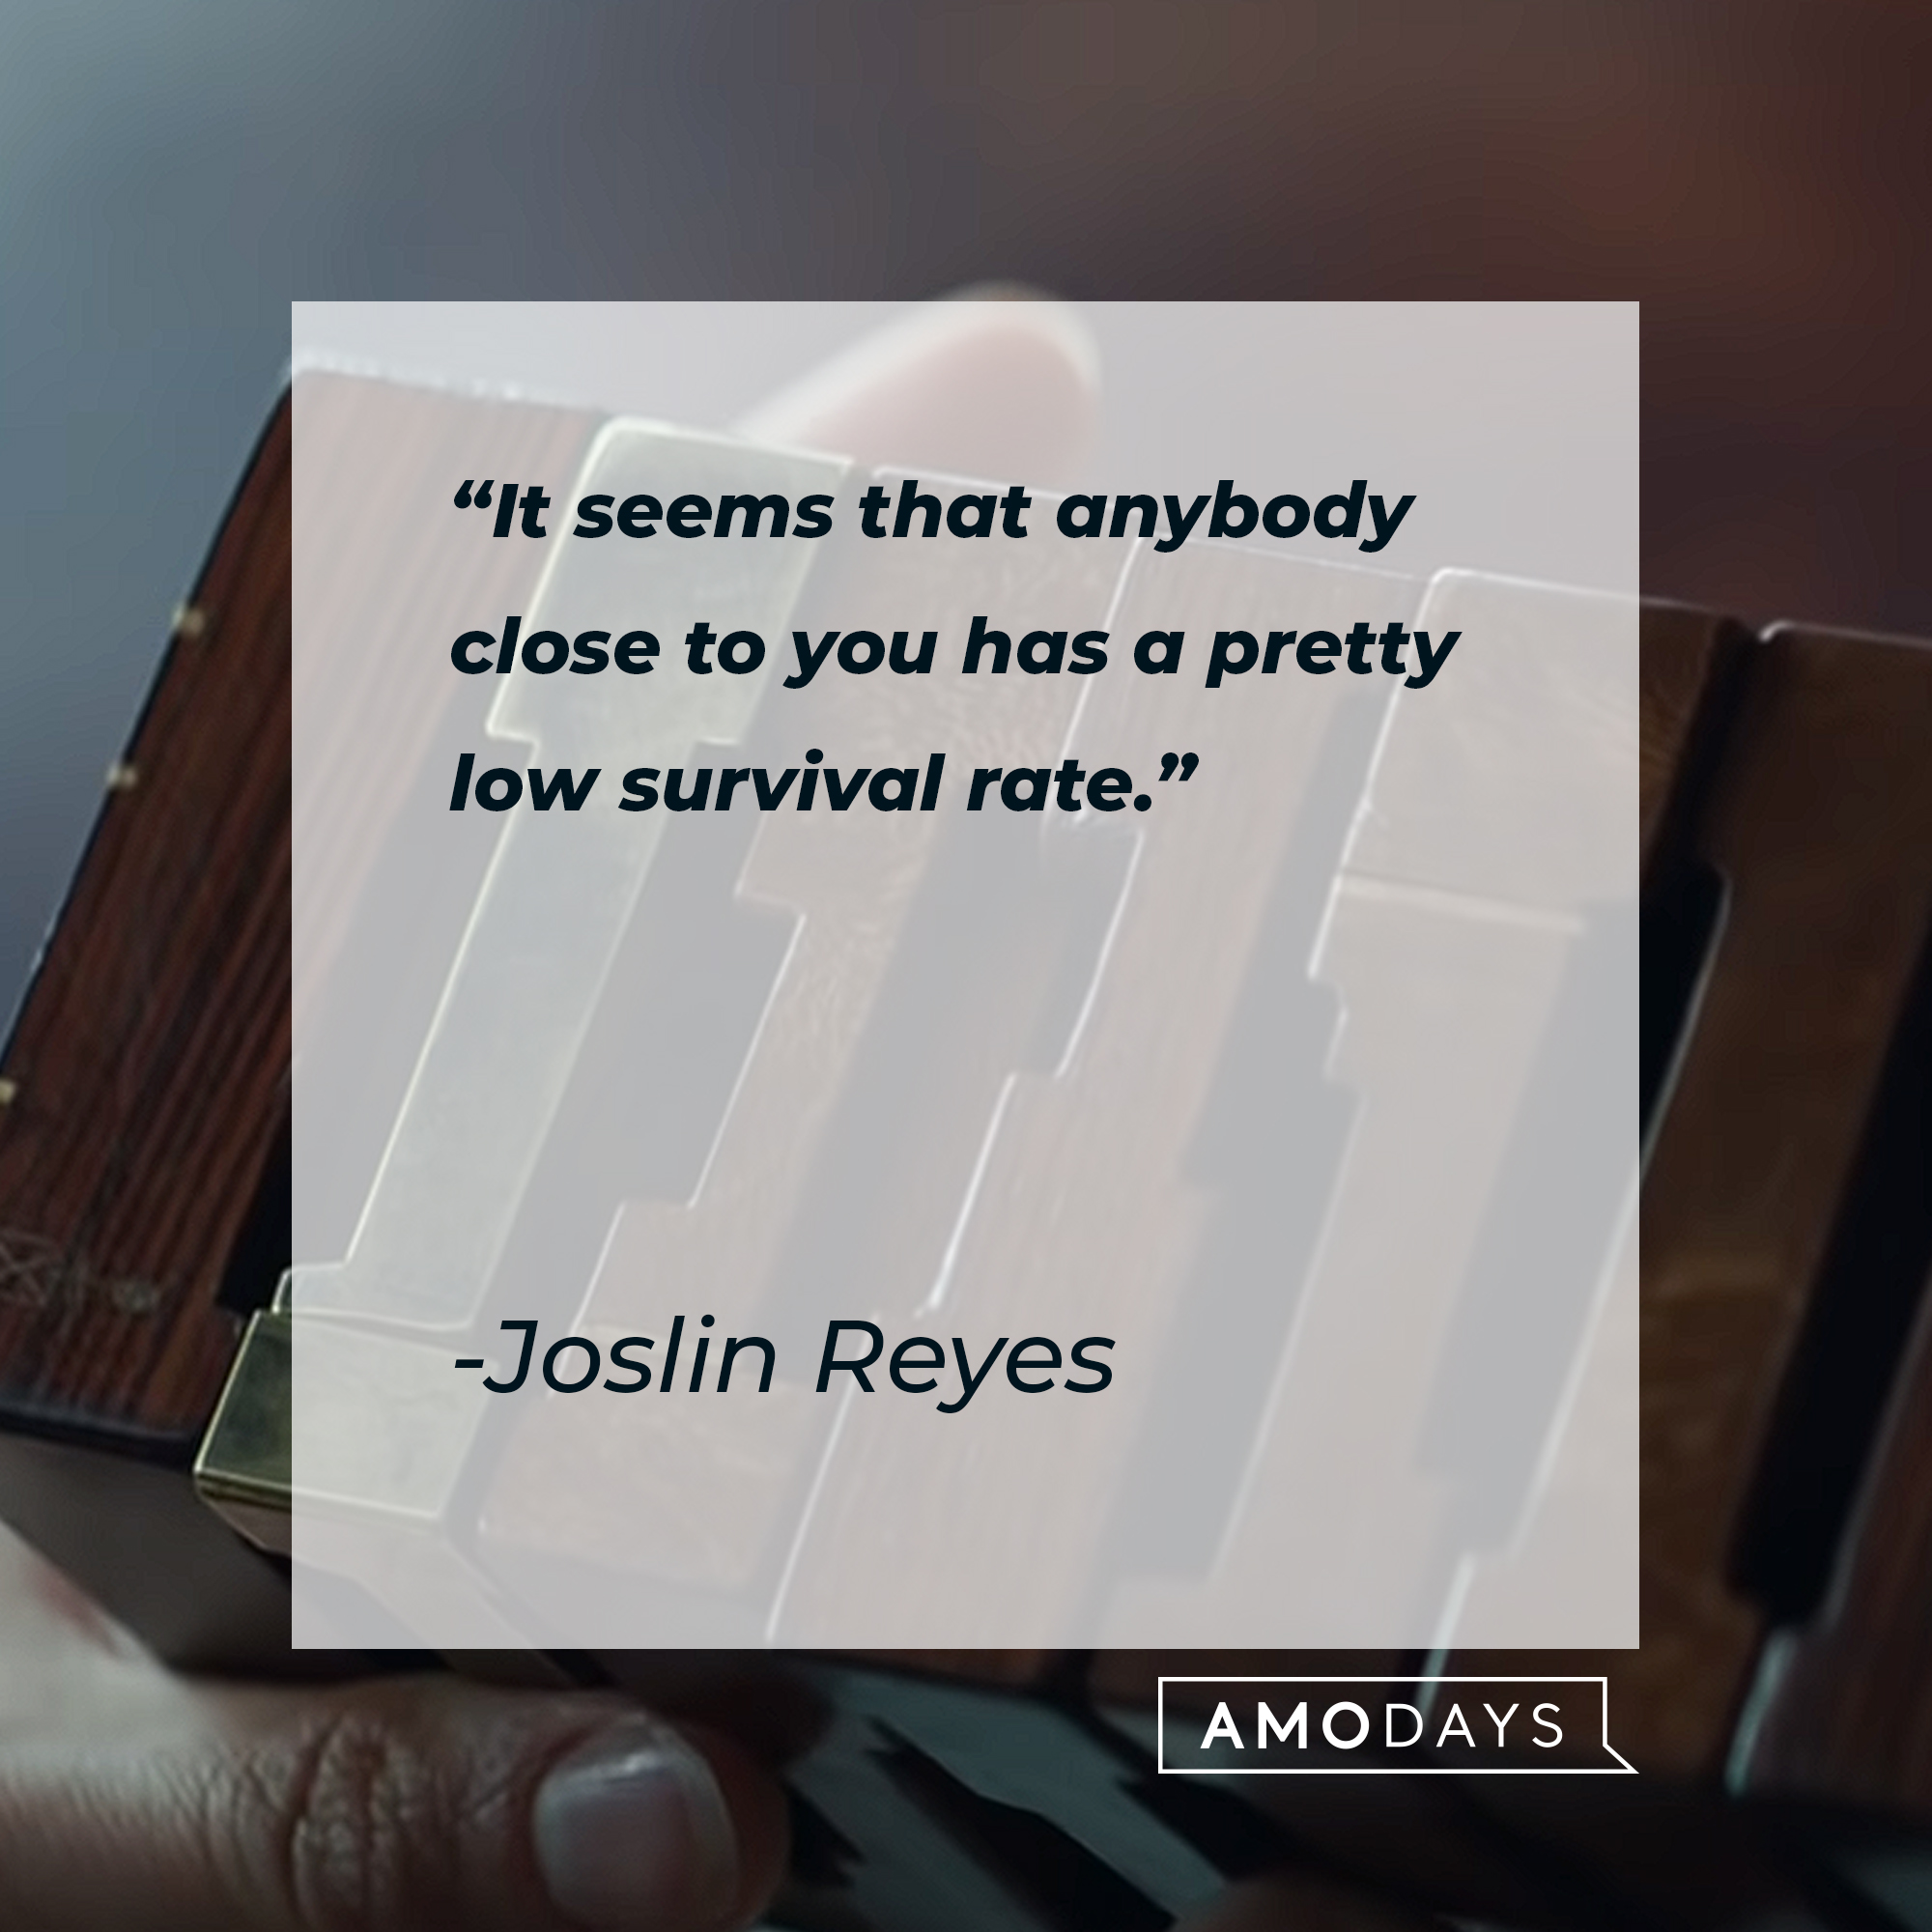 An image of a chest with a quote by Joslin Reyes: “It seems that anybody close to you has a pretty low survival rate.” | Source: youtube.com/WarnerBrosPictures